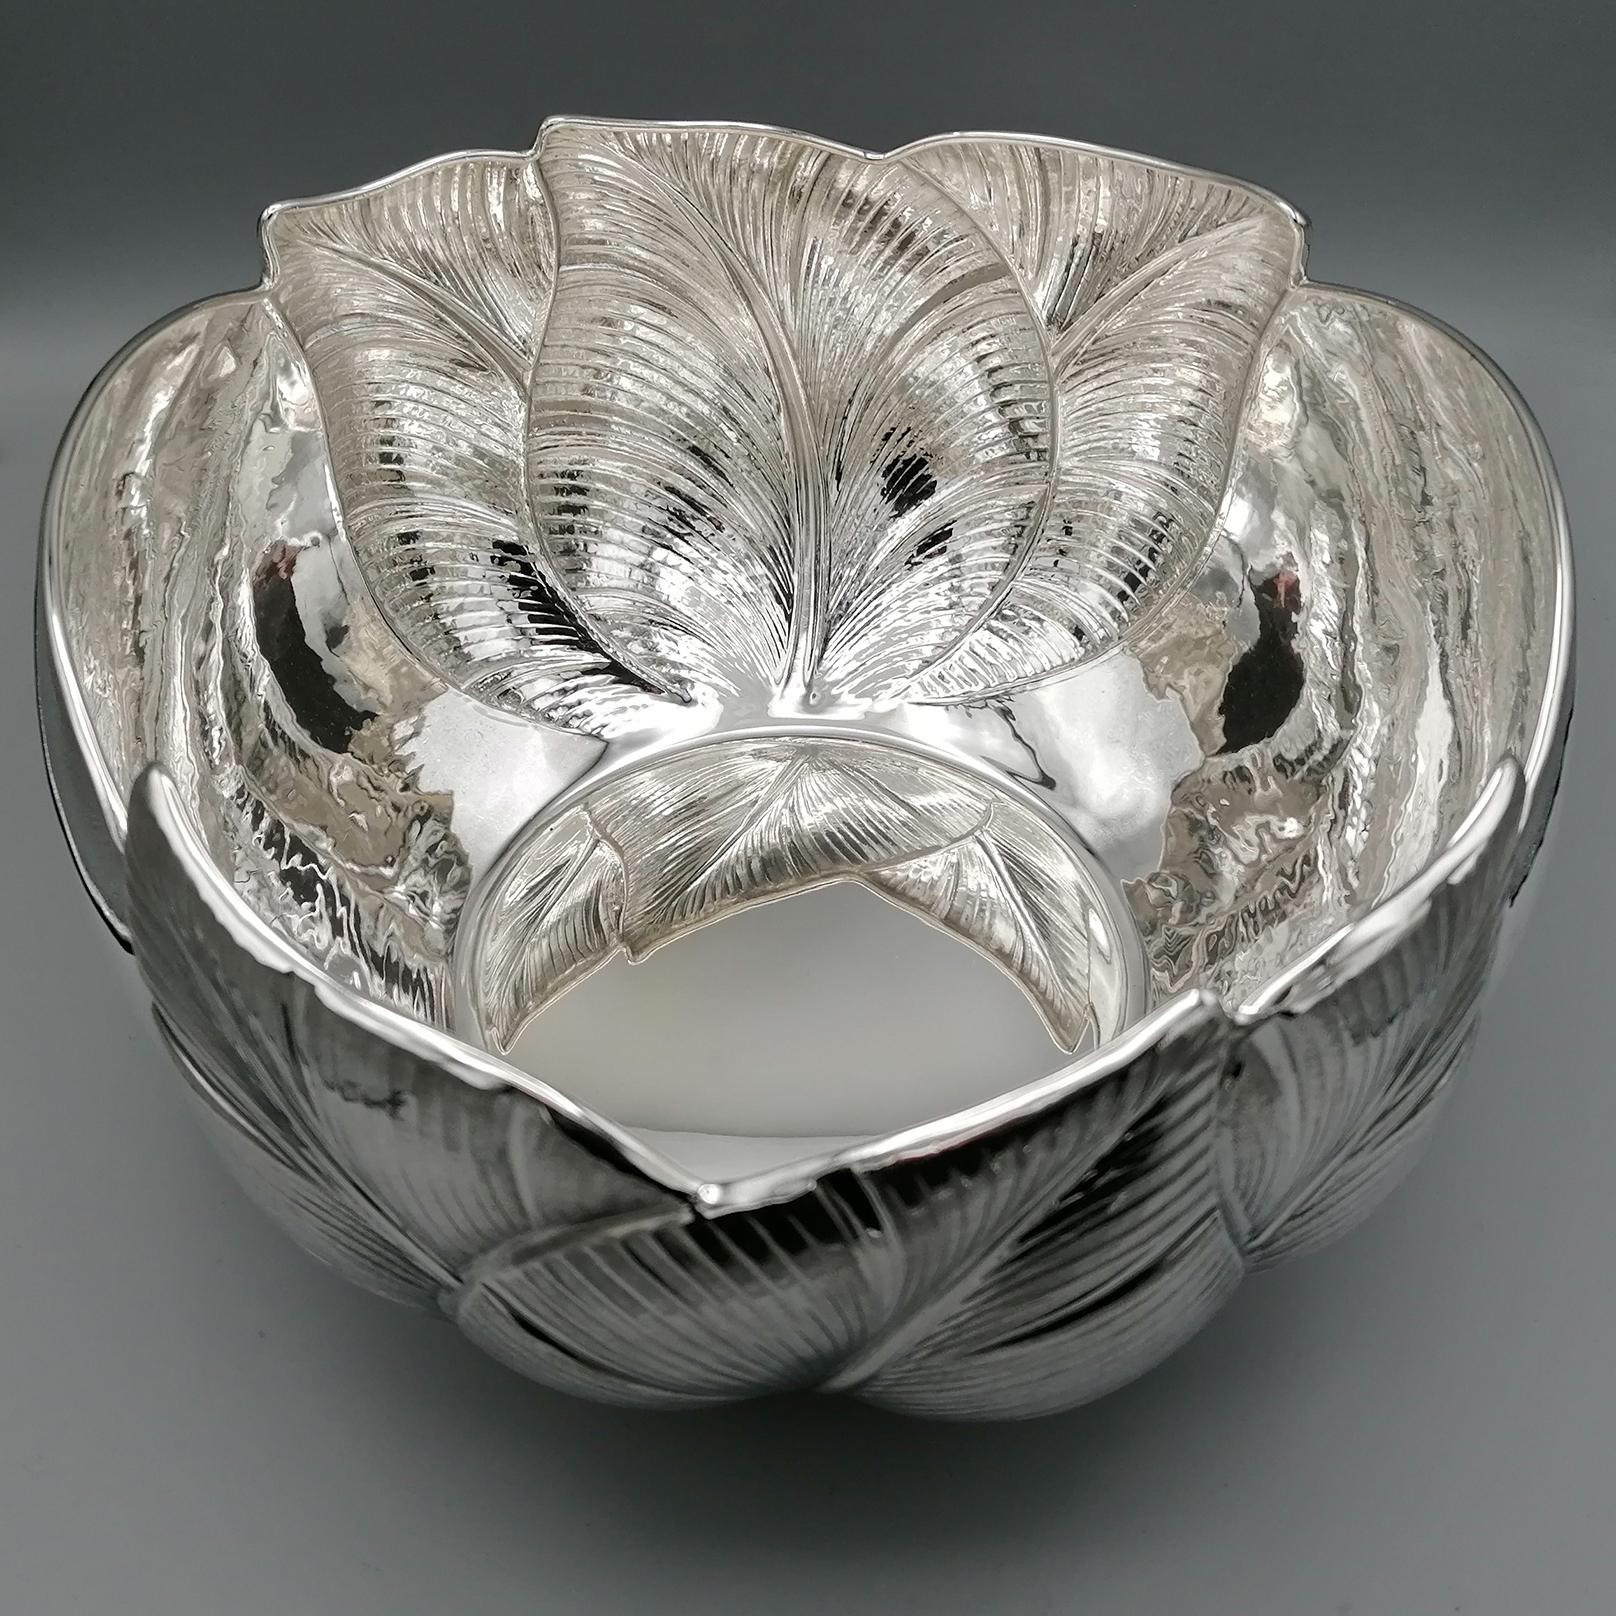 Contemporary 21st Century italian Sterling Silver Centerpiece For Sale